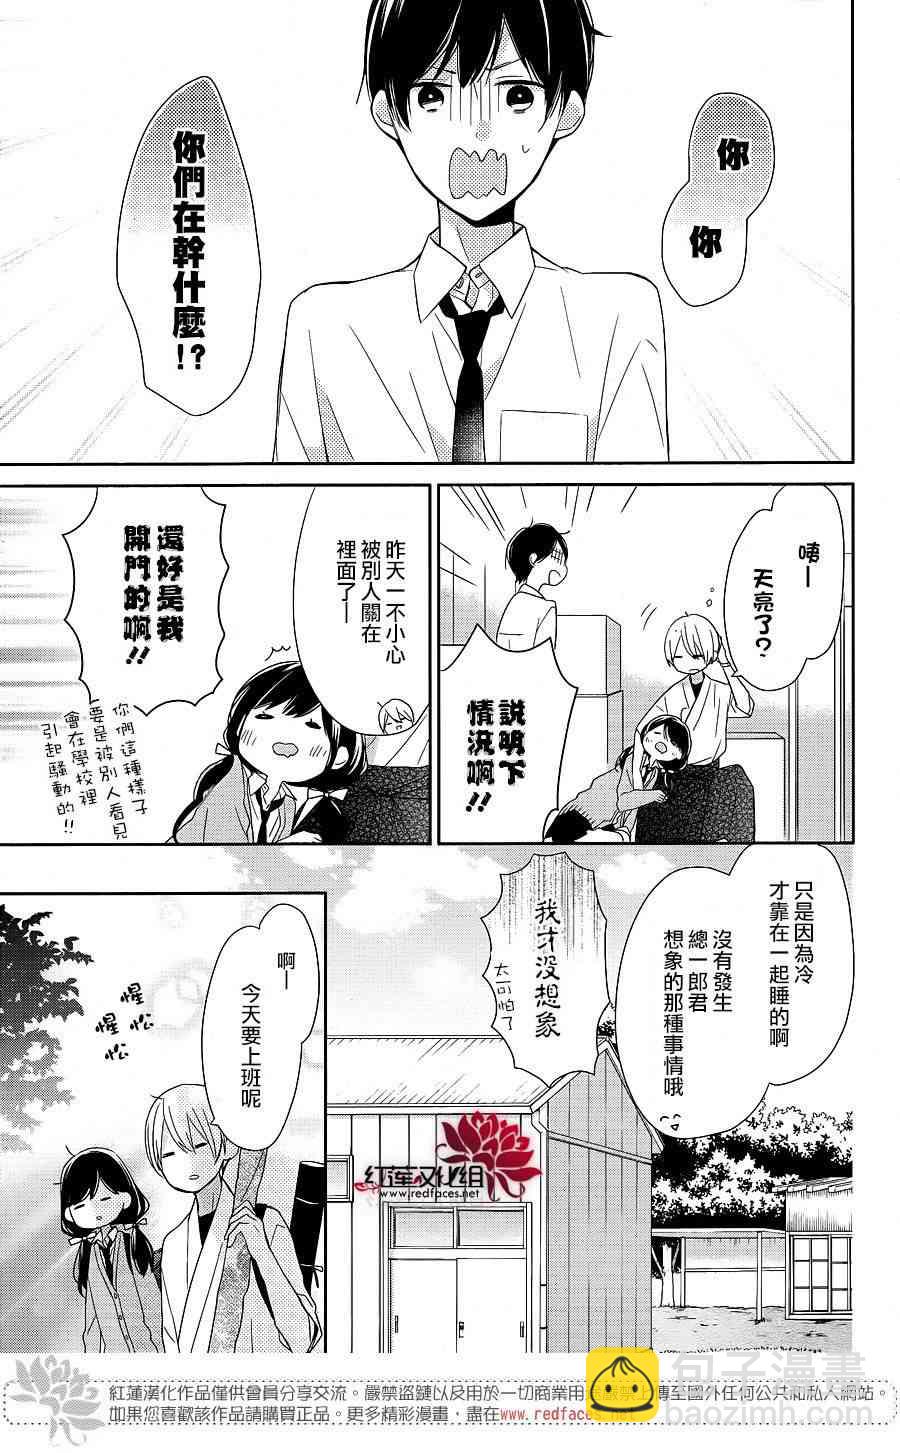 If given a second chance - 8話 - 5